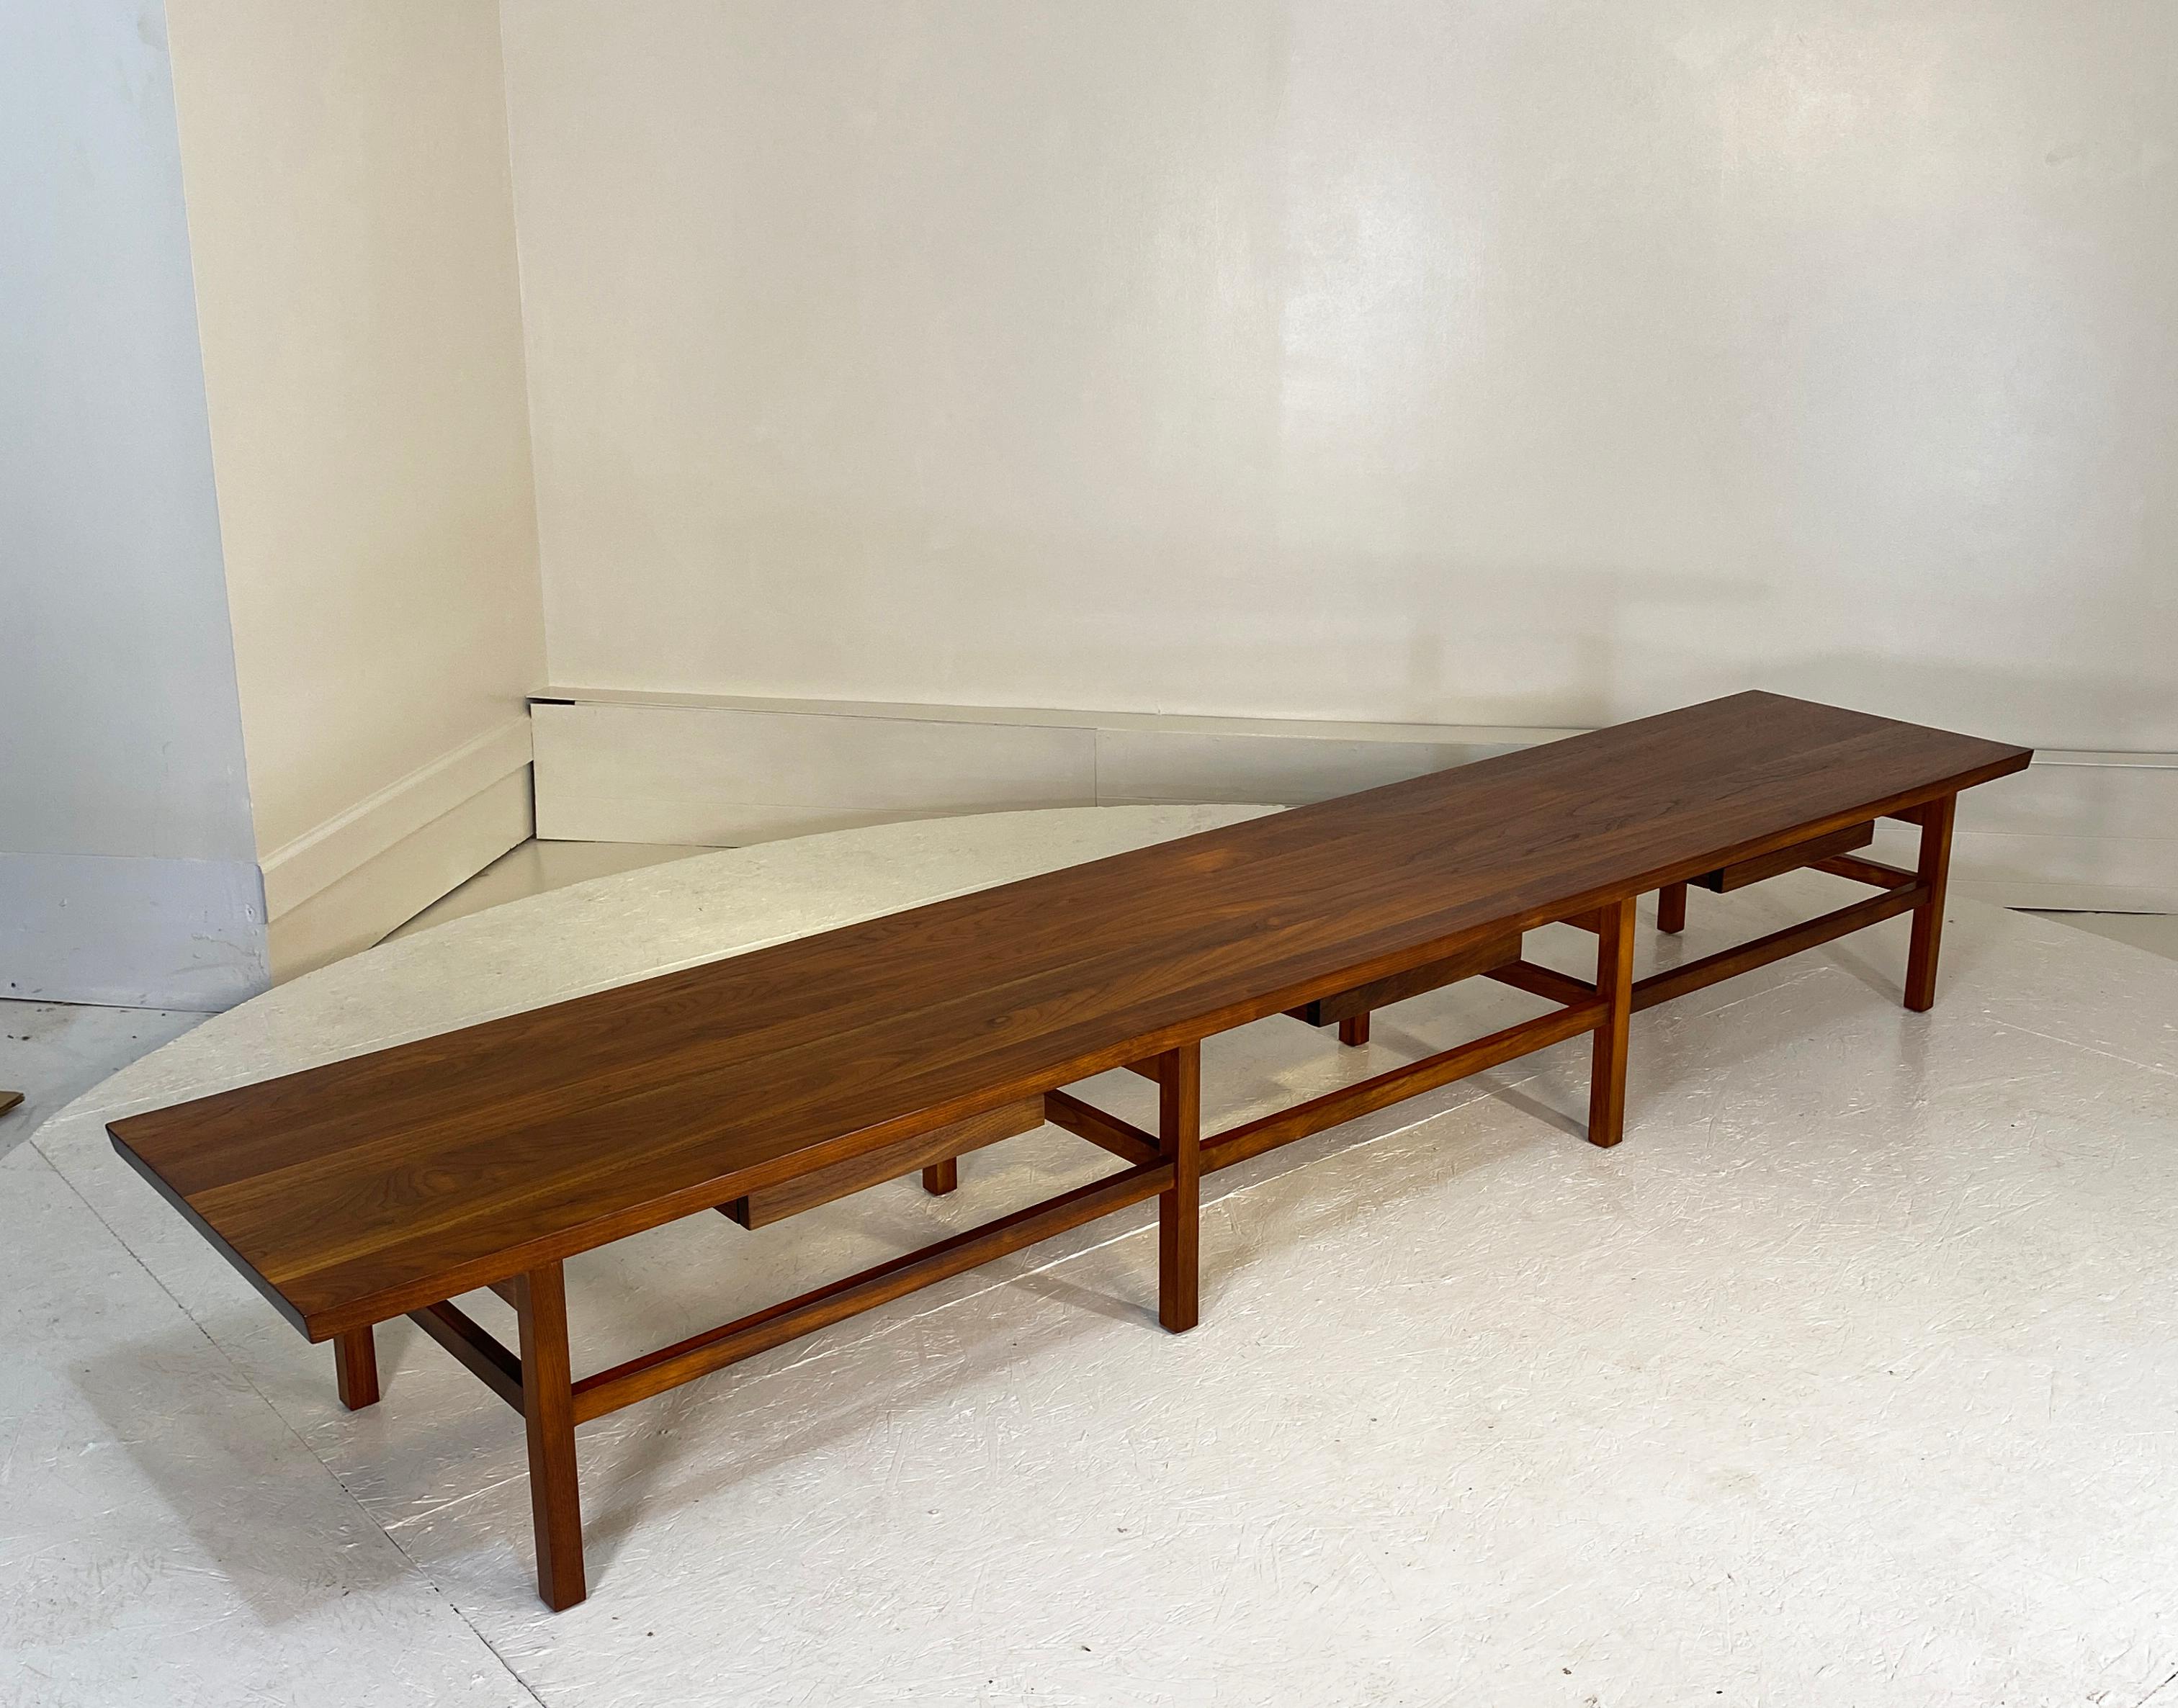 A remarkably large coffee table table or bench 9 feett length. Depth 19.75